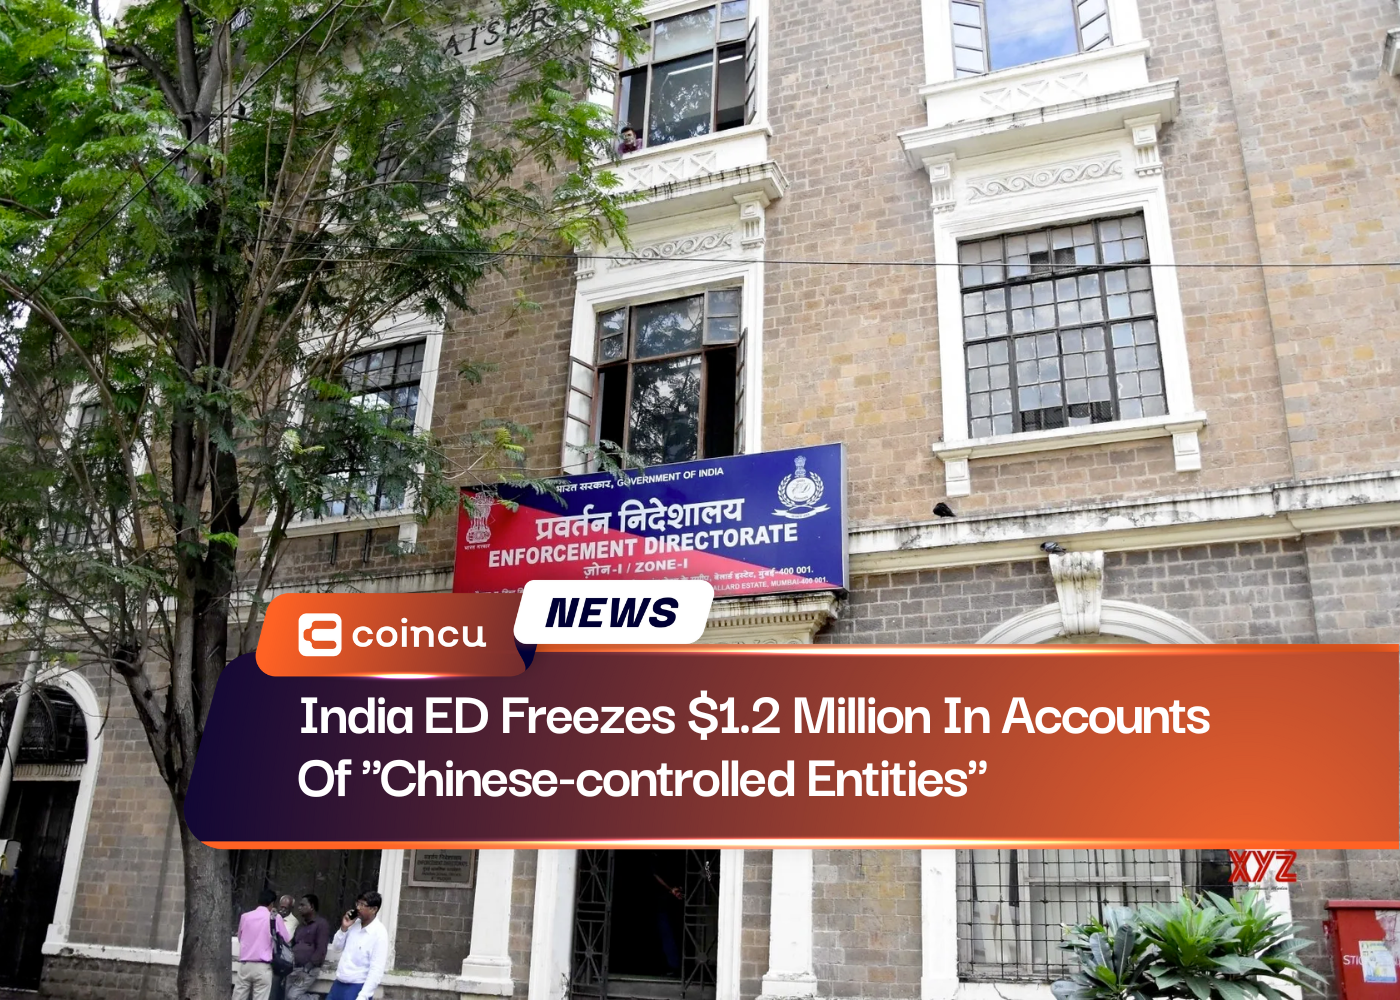 India ED Freezes $1.2 Million In Accounts Of "Chinese-controlled Entities"